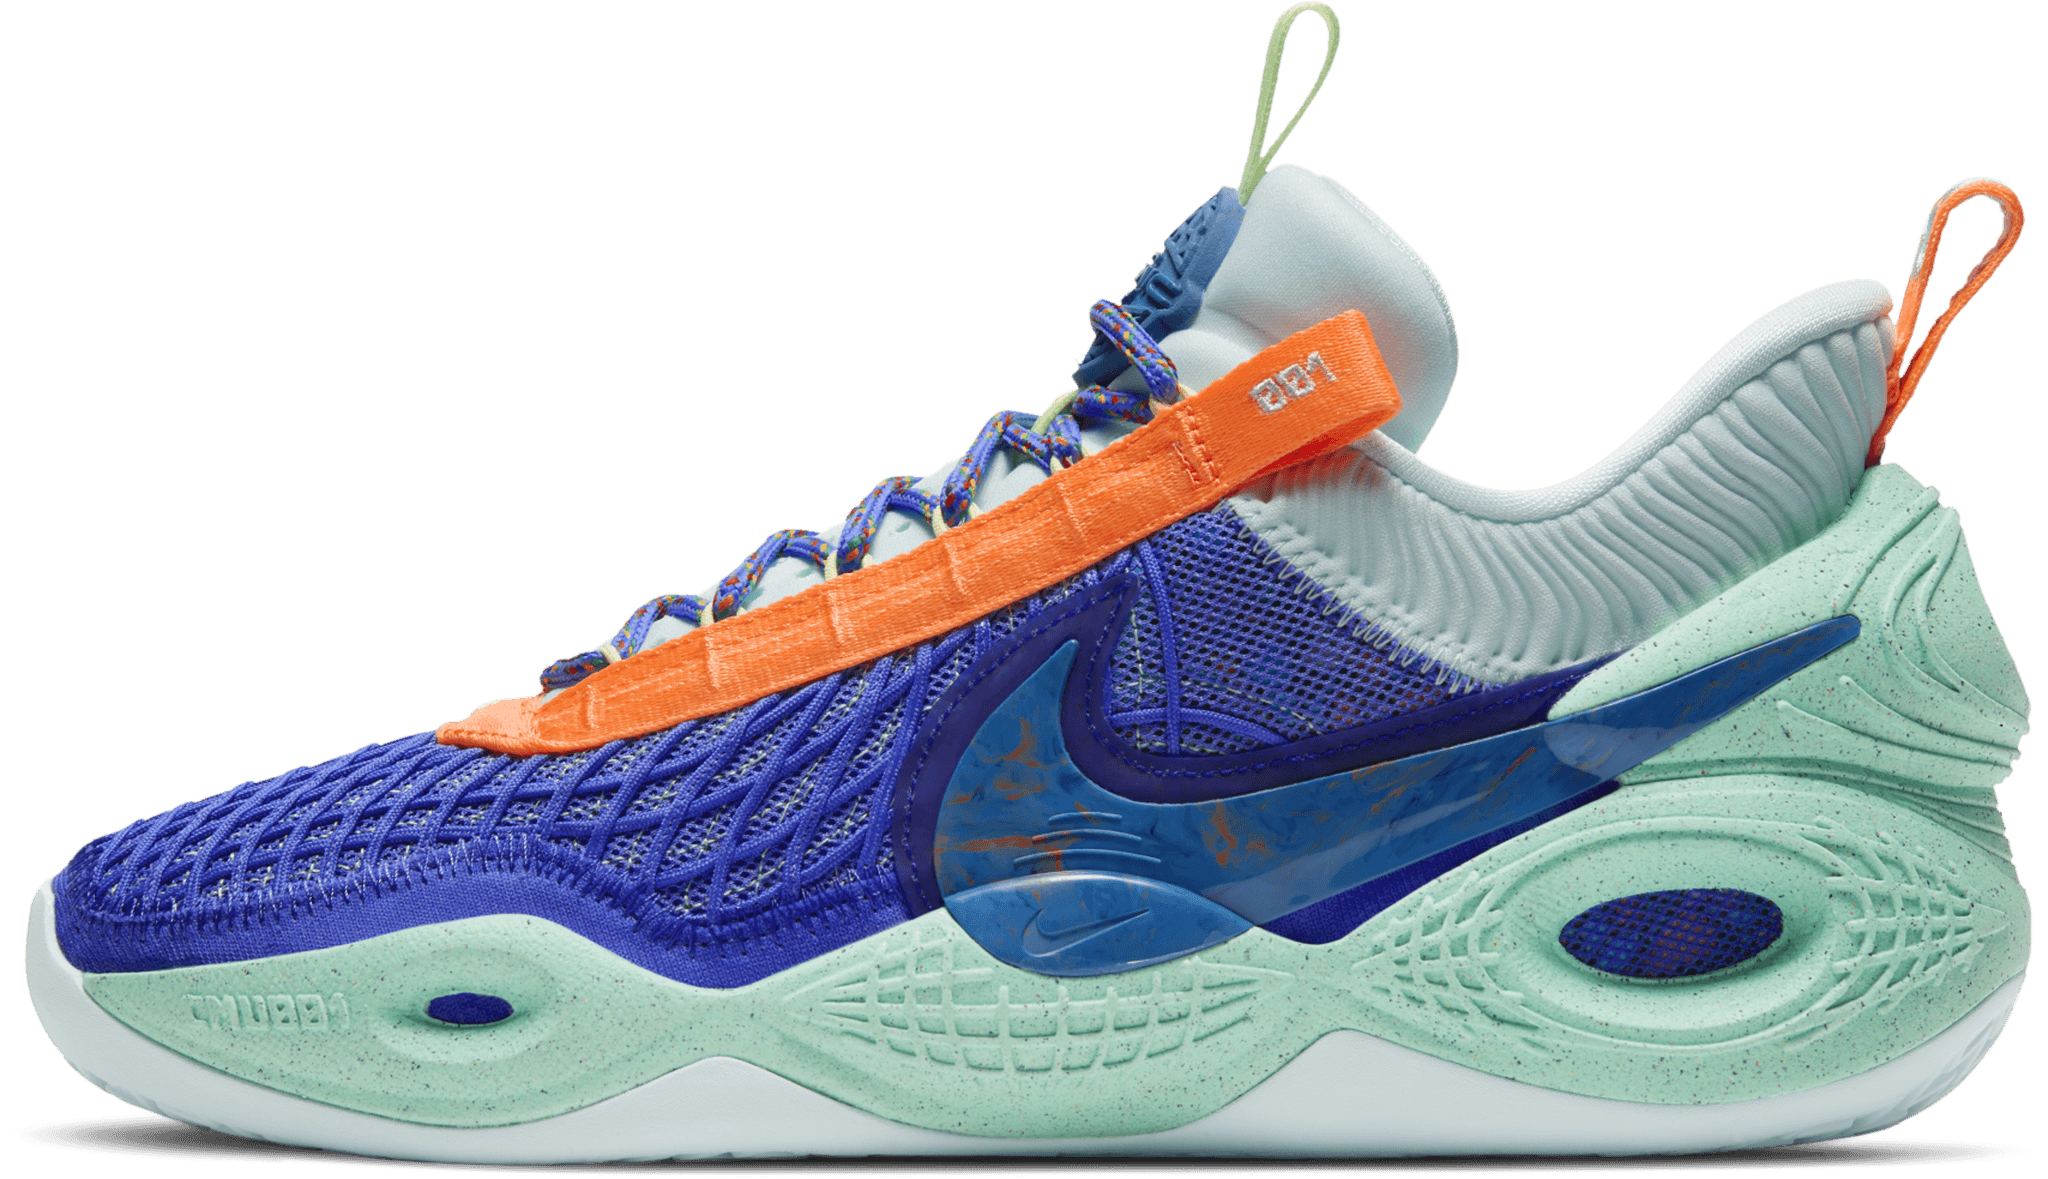 best bball shoes 2019